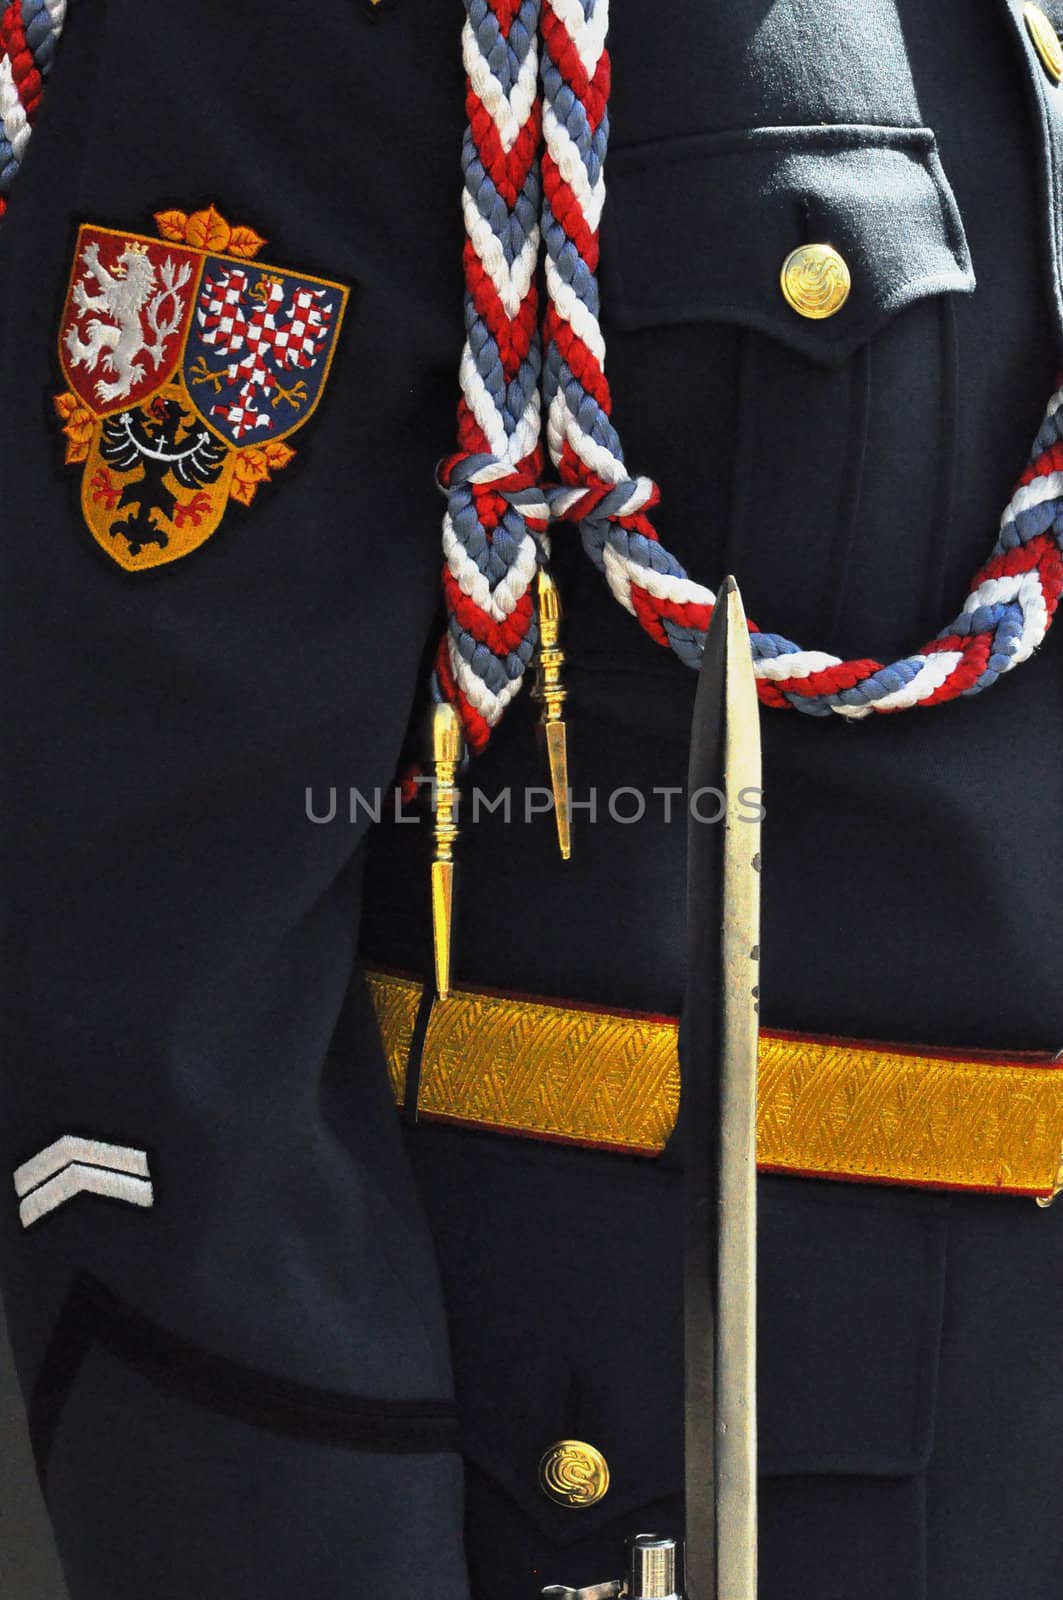 This is detail of cloth Prague Castle guards with czech symbol.